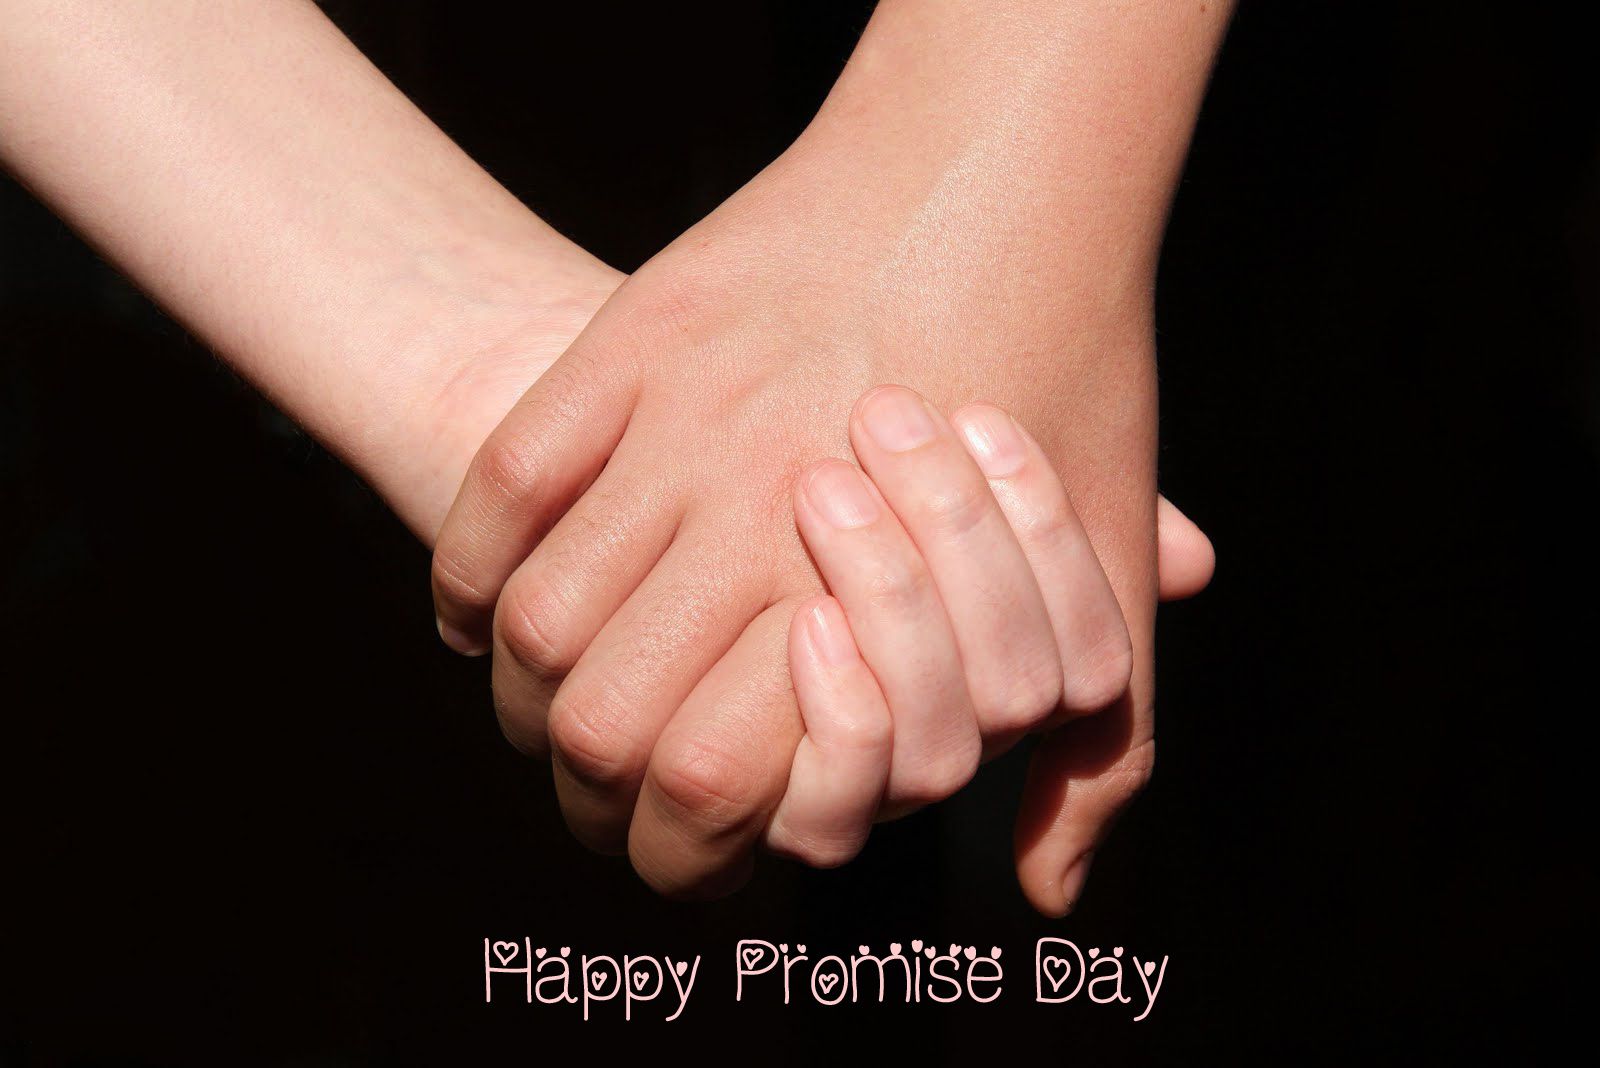 Download, Send, Promise Day Wishes, E-Greetings, Promise Day, Promise Day – 11 February, Happy Promise Day, Promise Day 2015, Hold Hand Couples